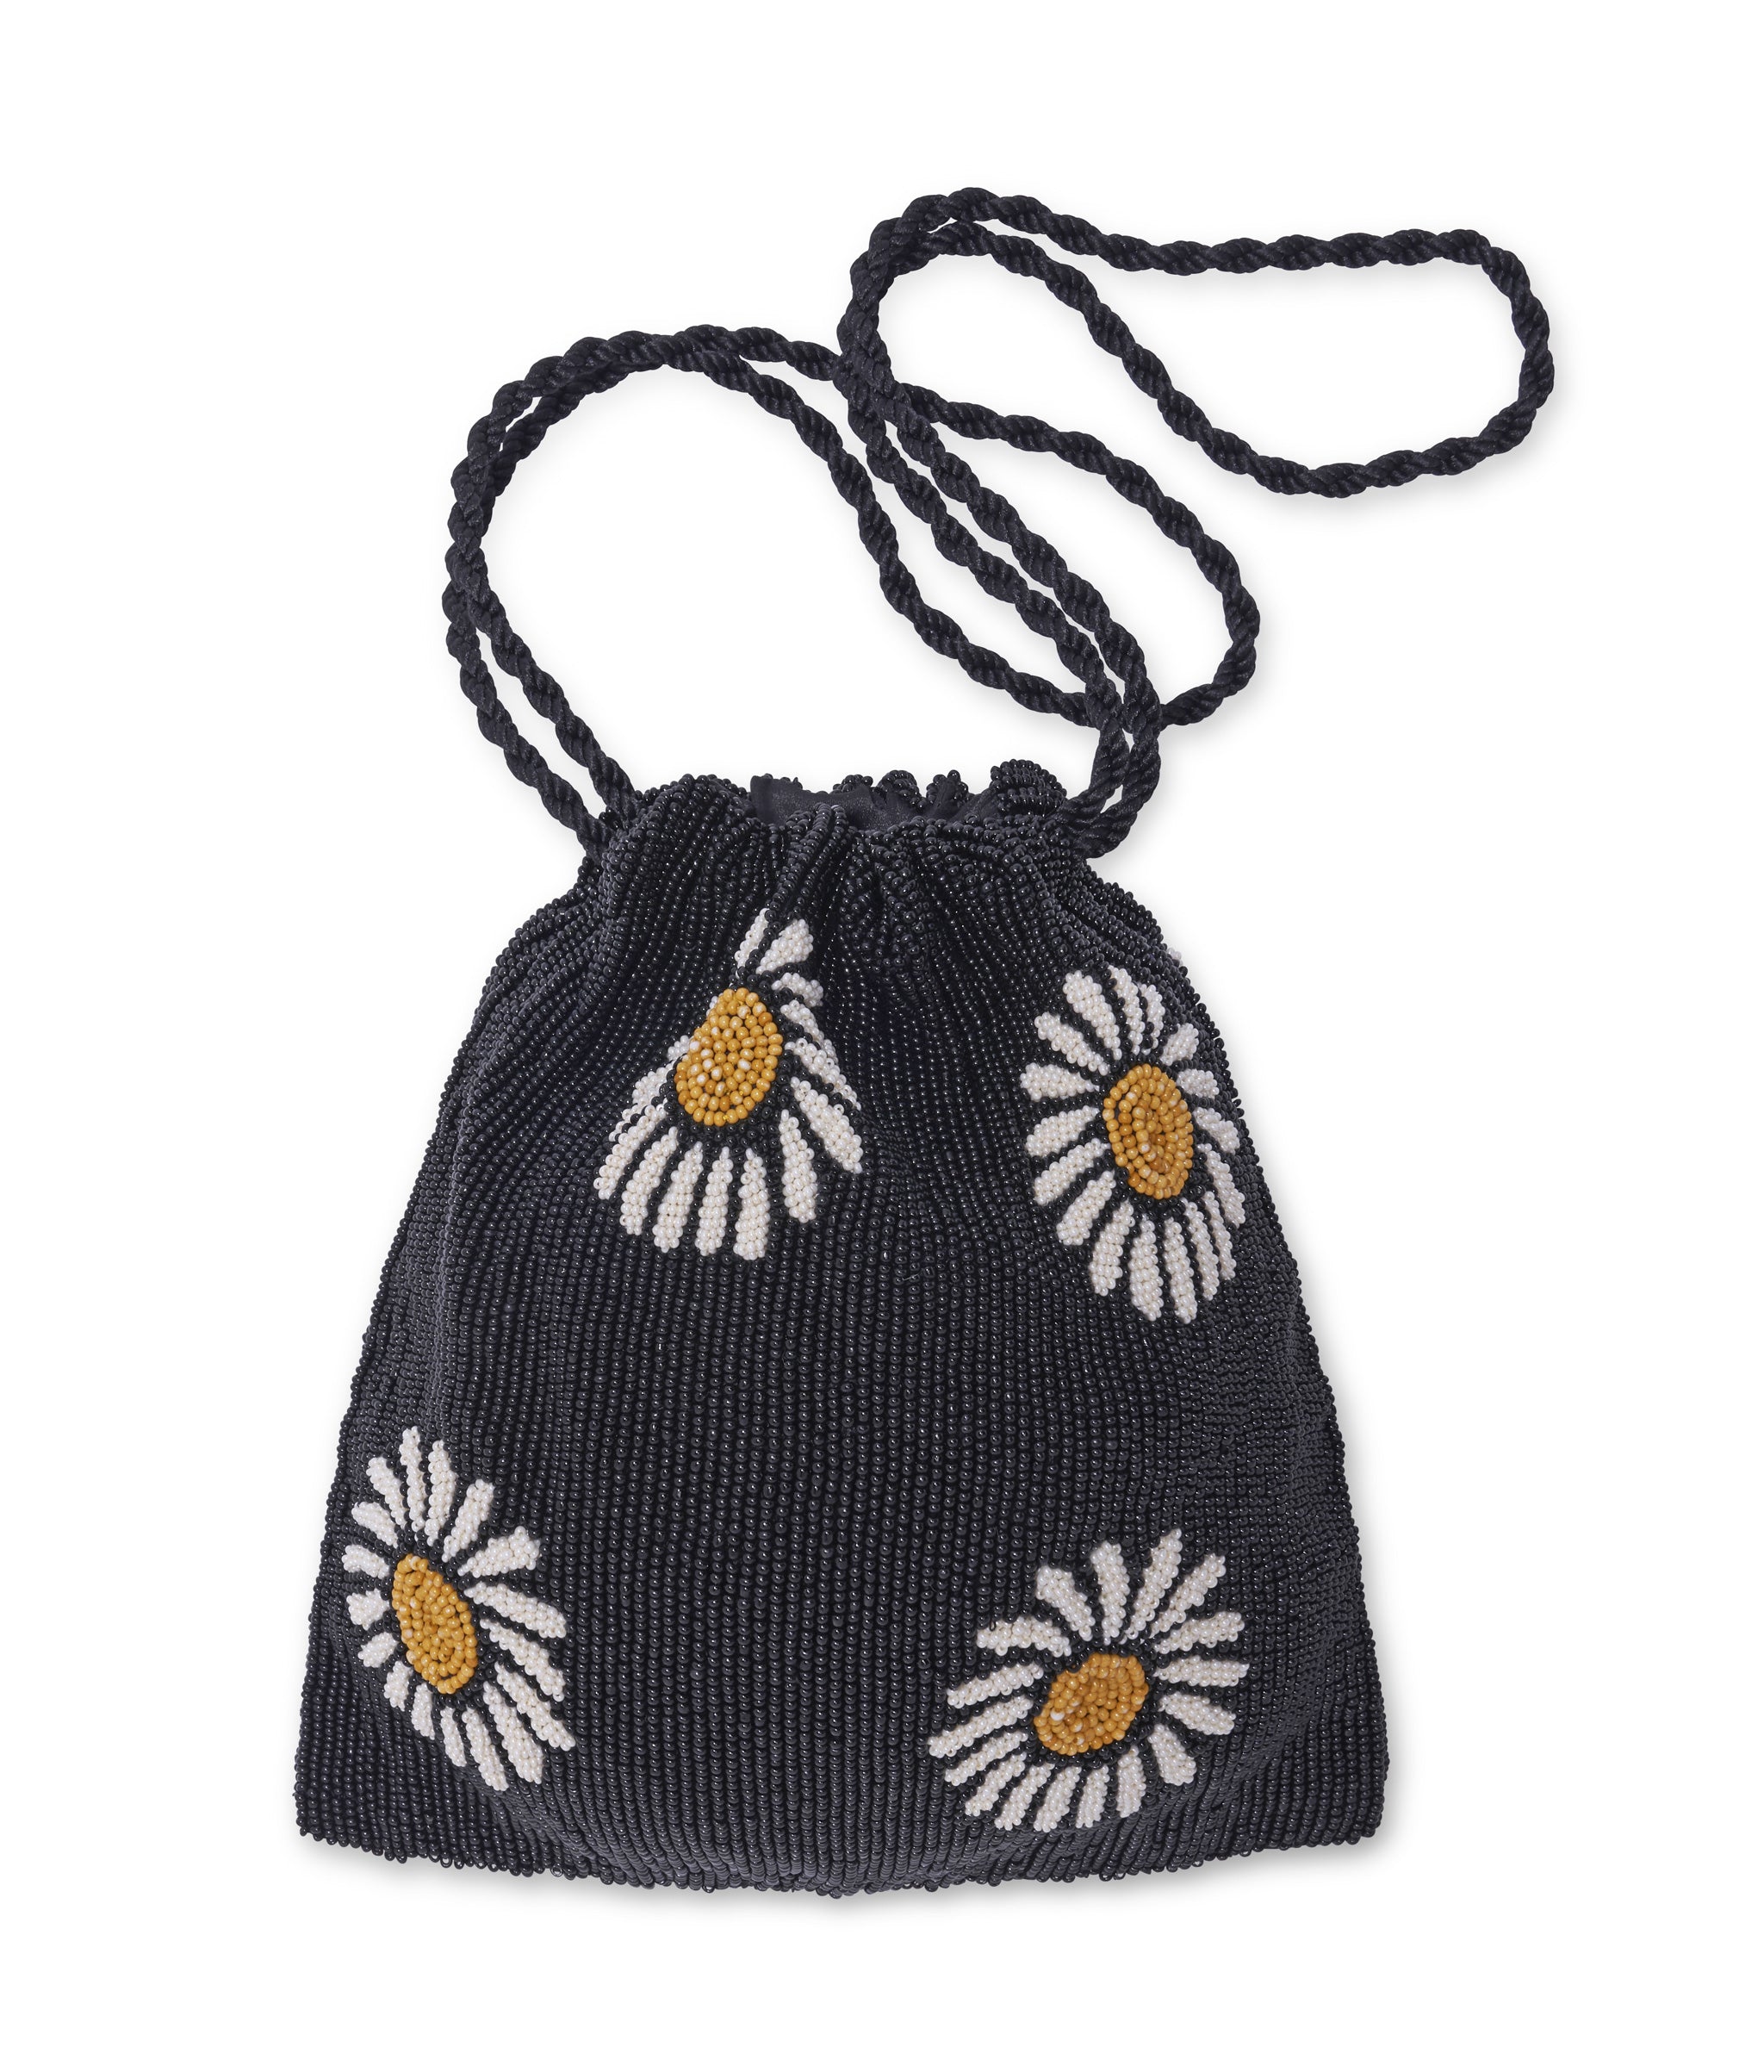 Gala Bag in Midnight Daisy. Beaded mini purse with black daisy floral print and black twist cord wristlet.